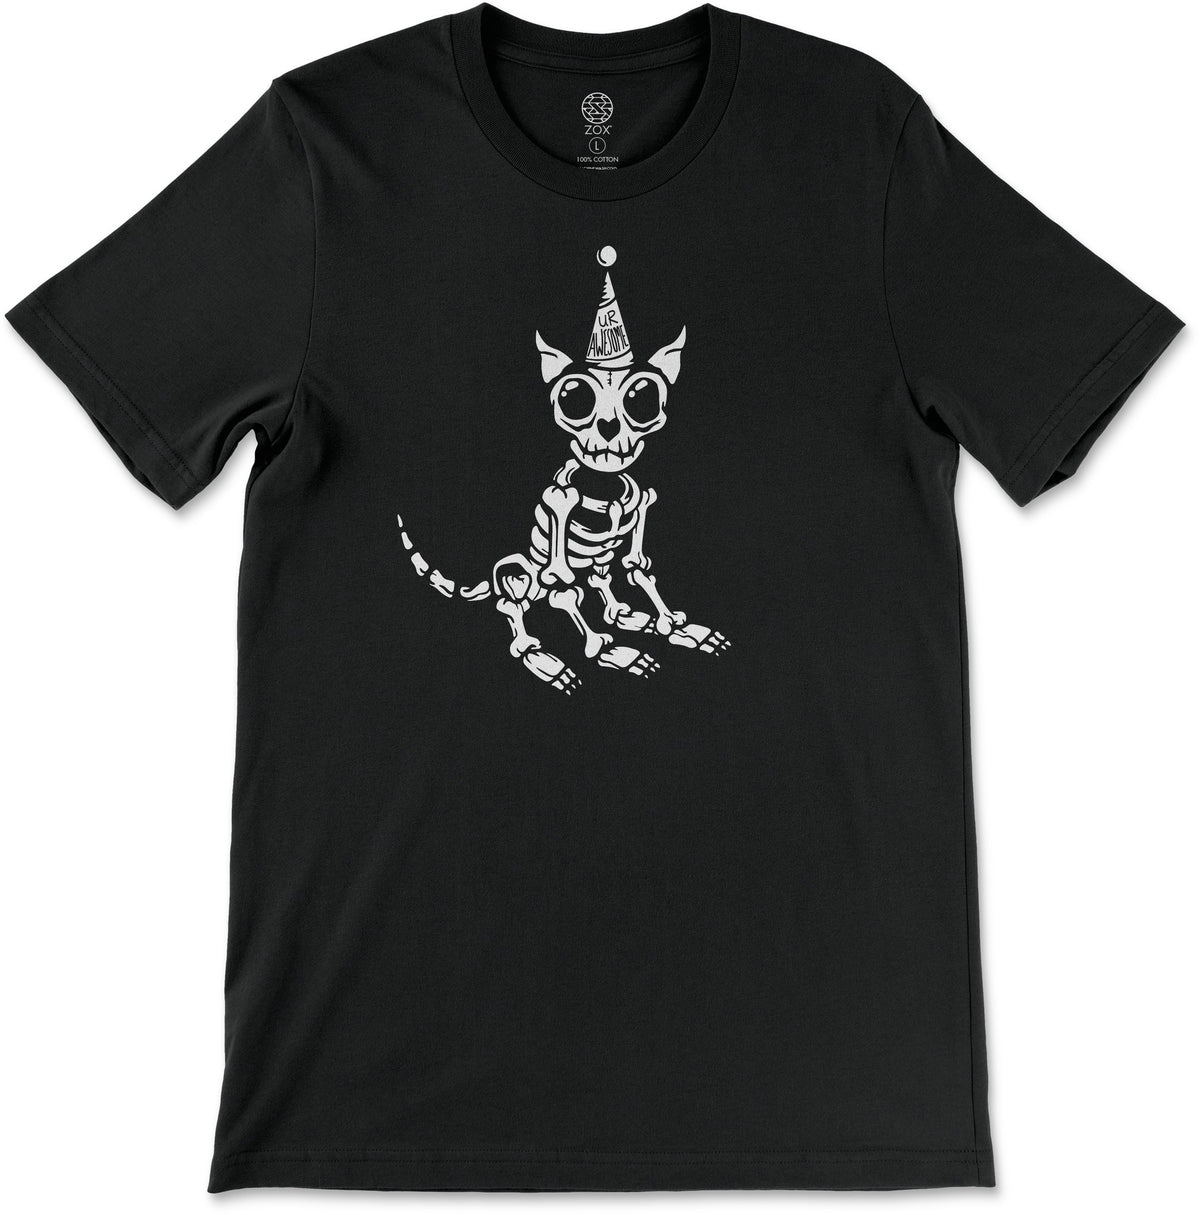 This is a reward item, do not purchase. Black tshirt with a skeleton of a small dog. The dog is wearing a birthday hat that reads UR AWESOME. 